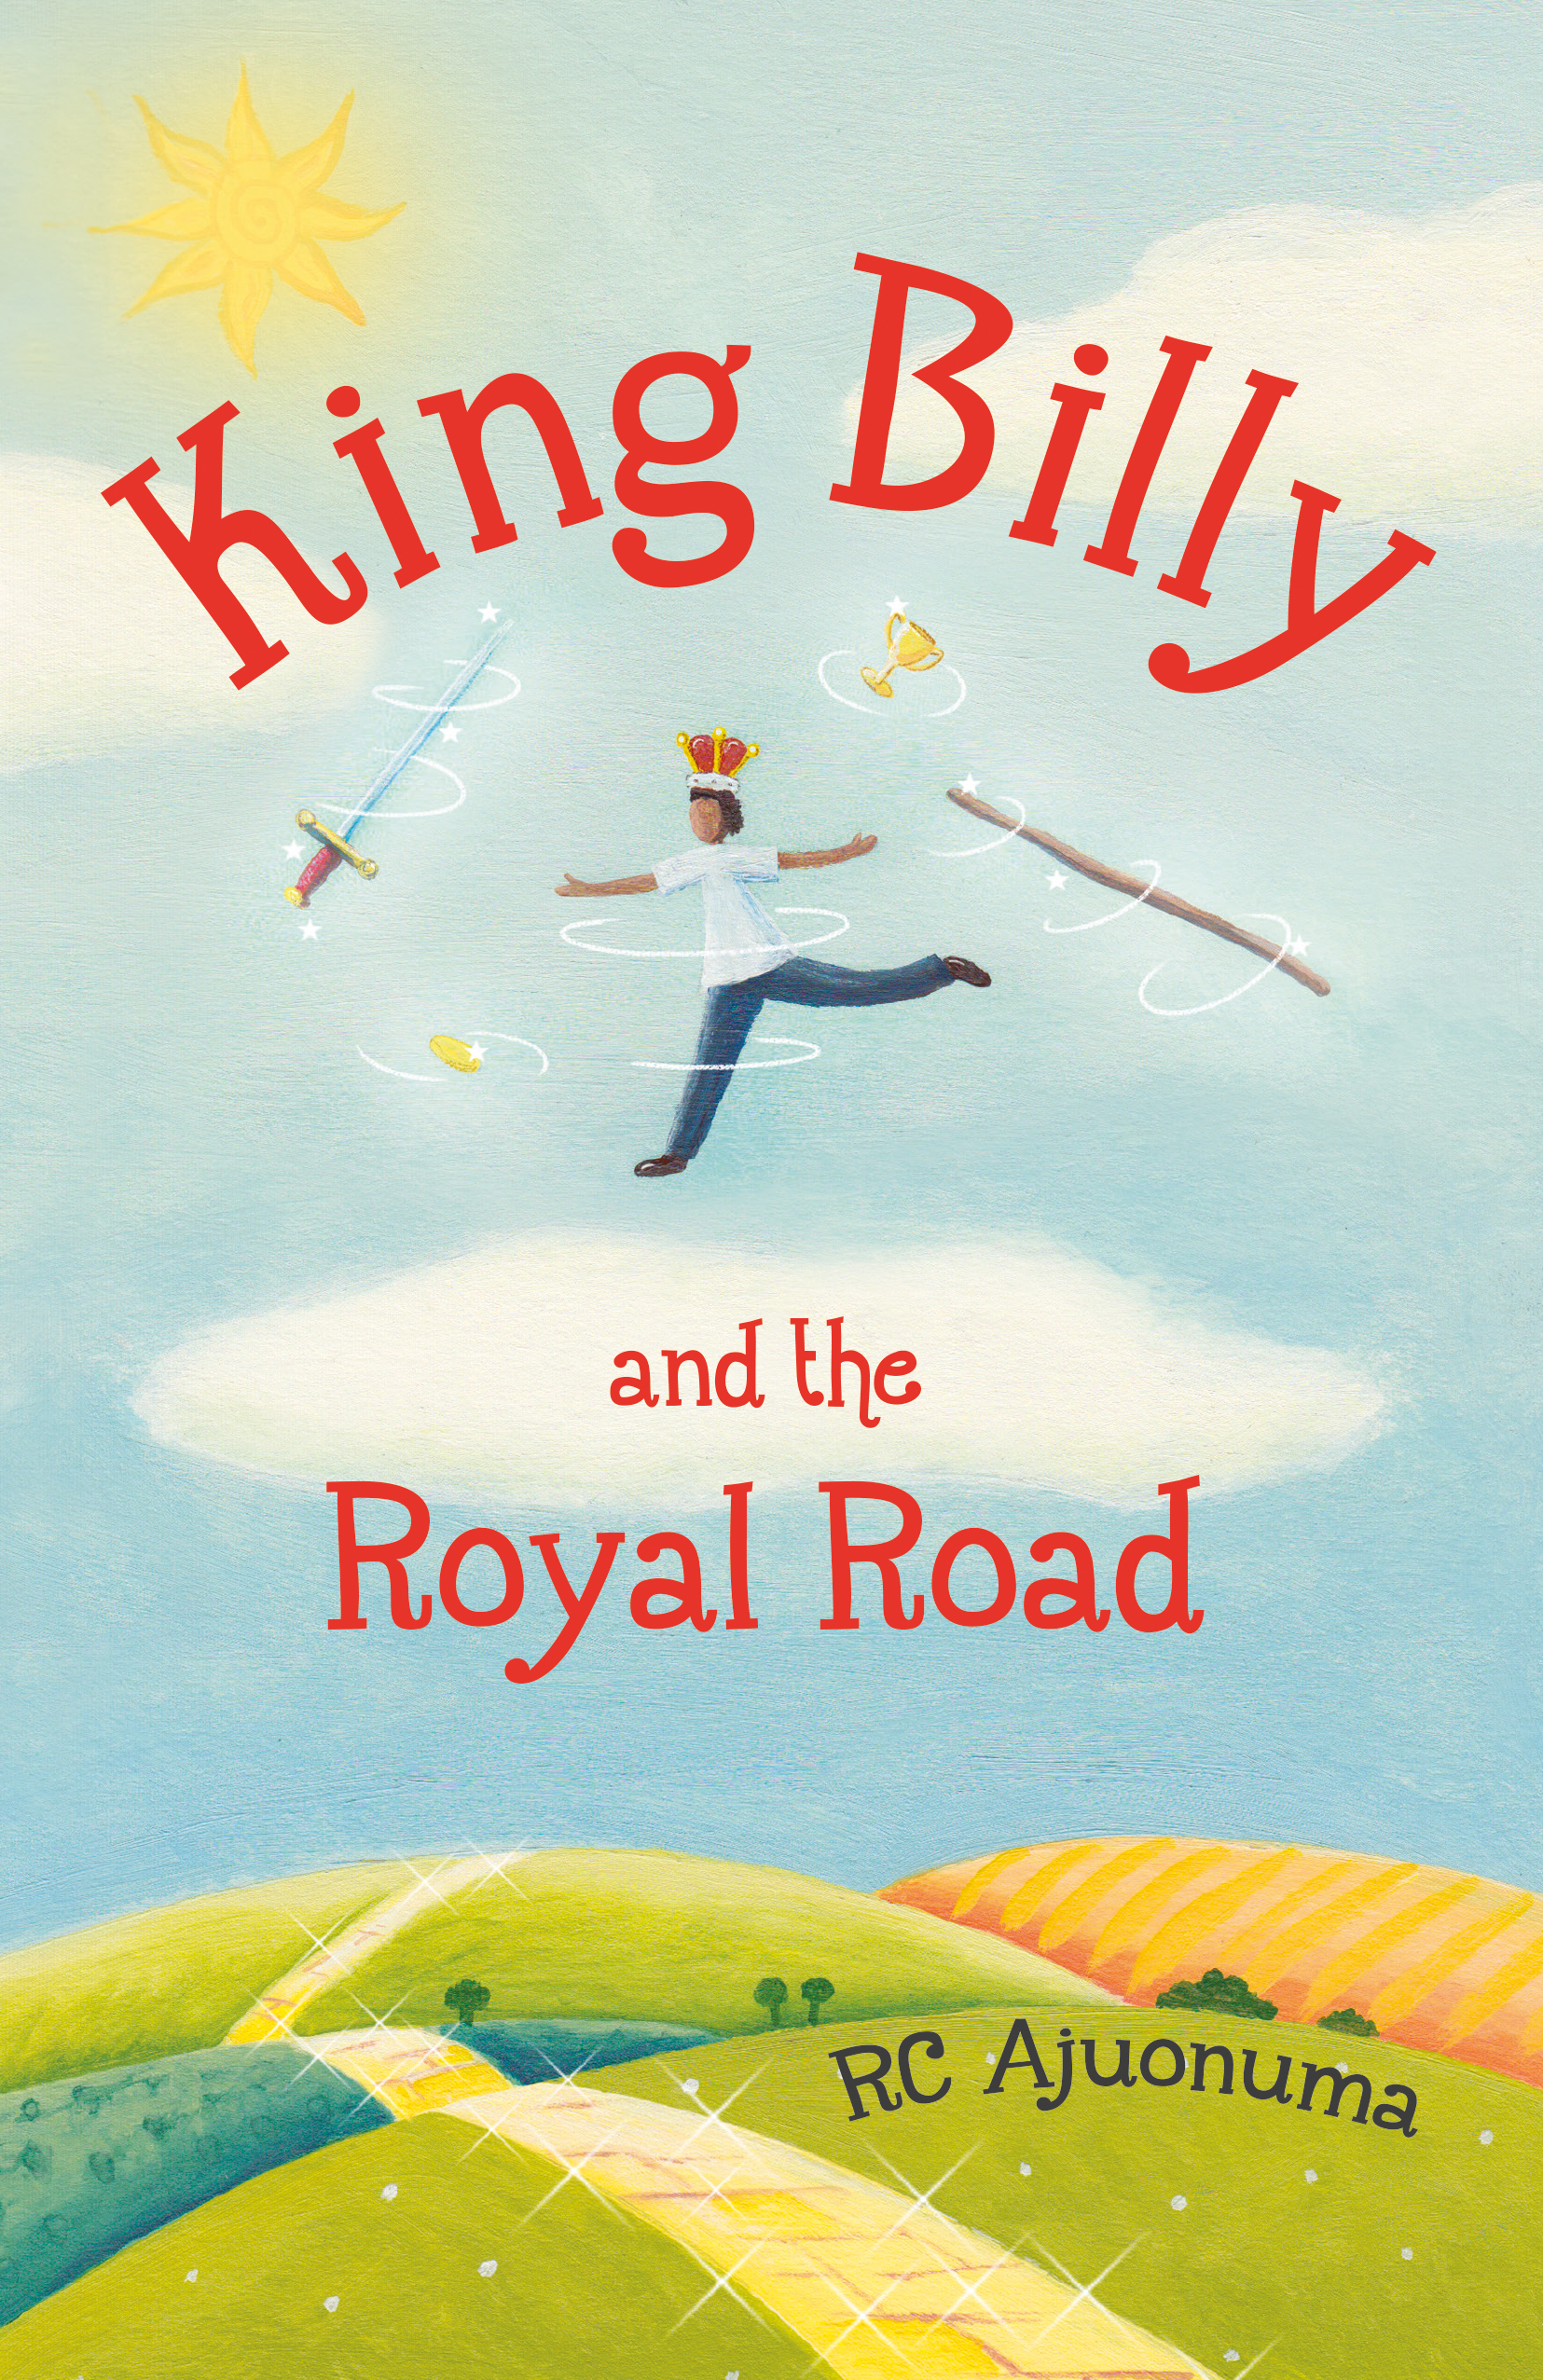 King Billy and the Royal Road by RC Ajuonuma book cover